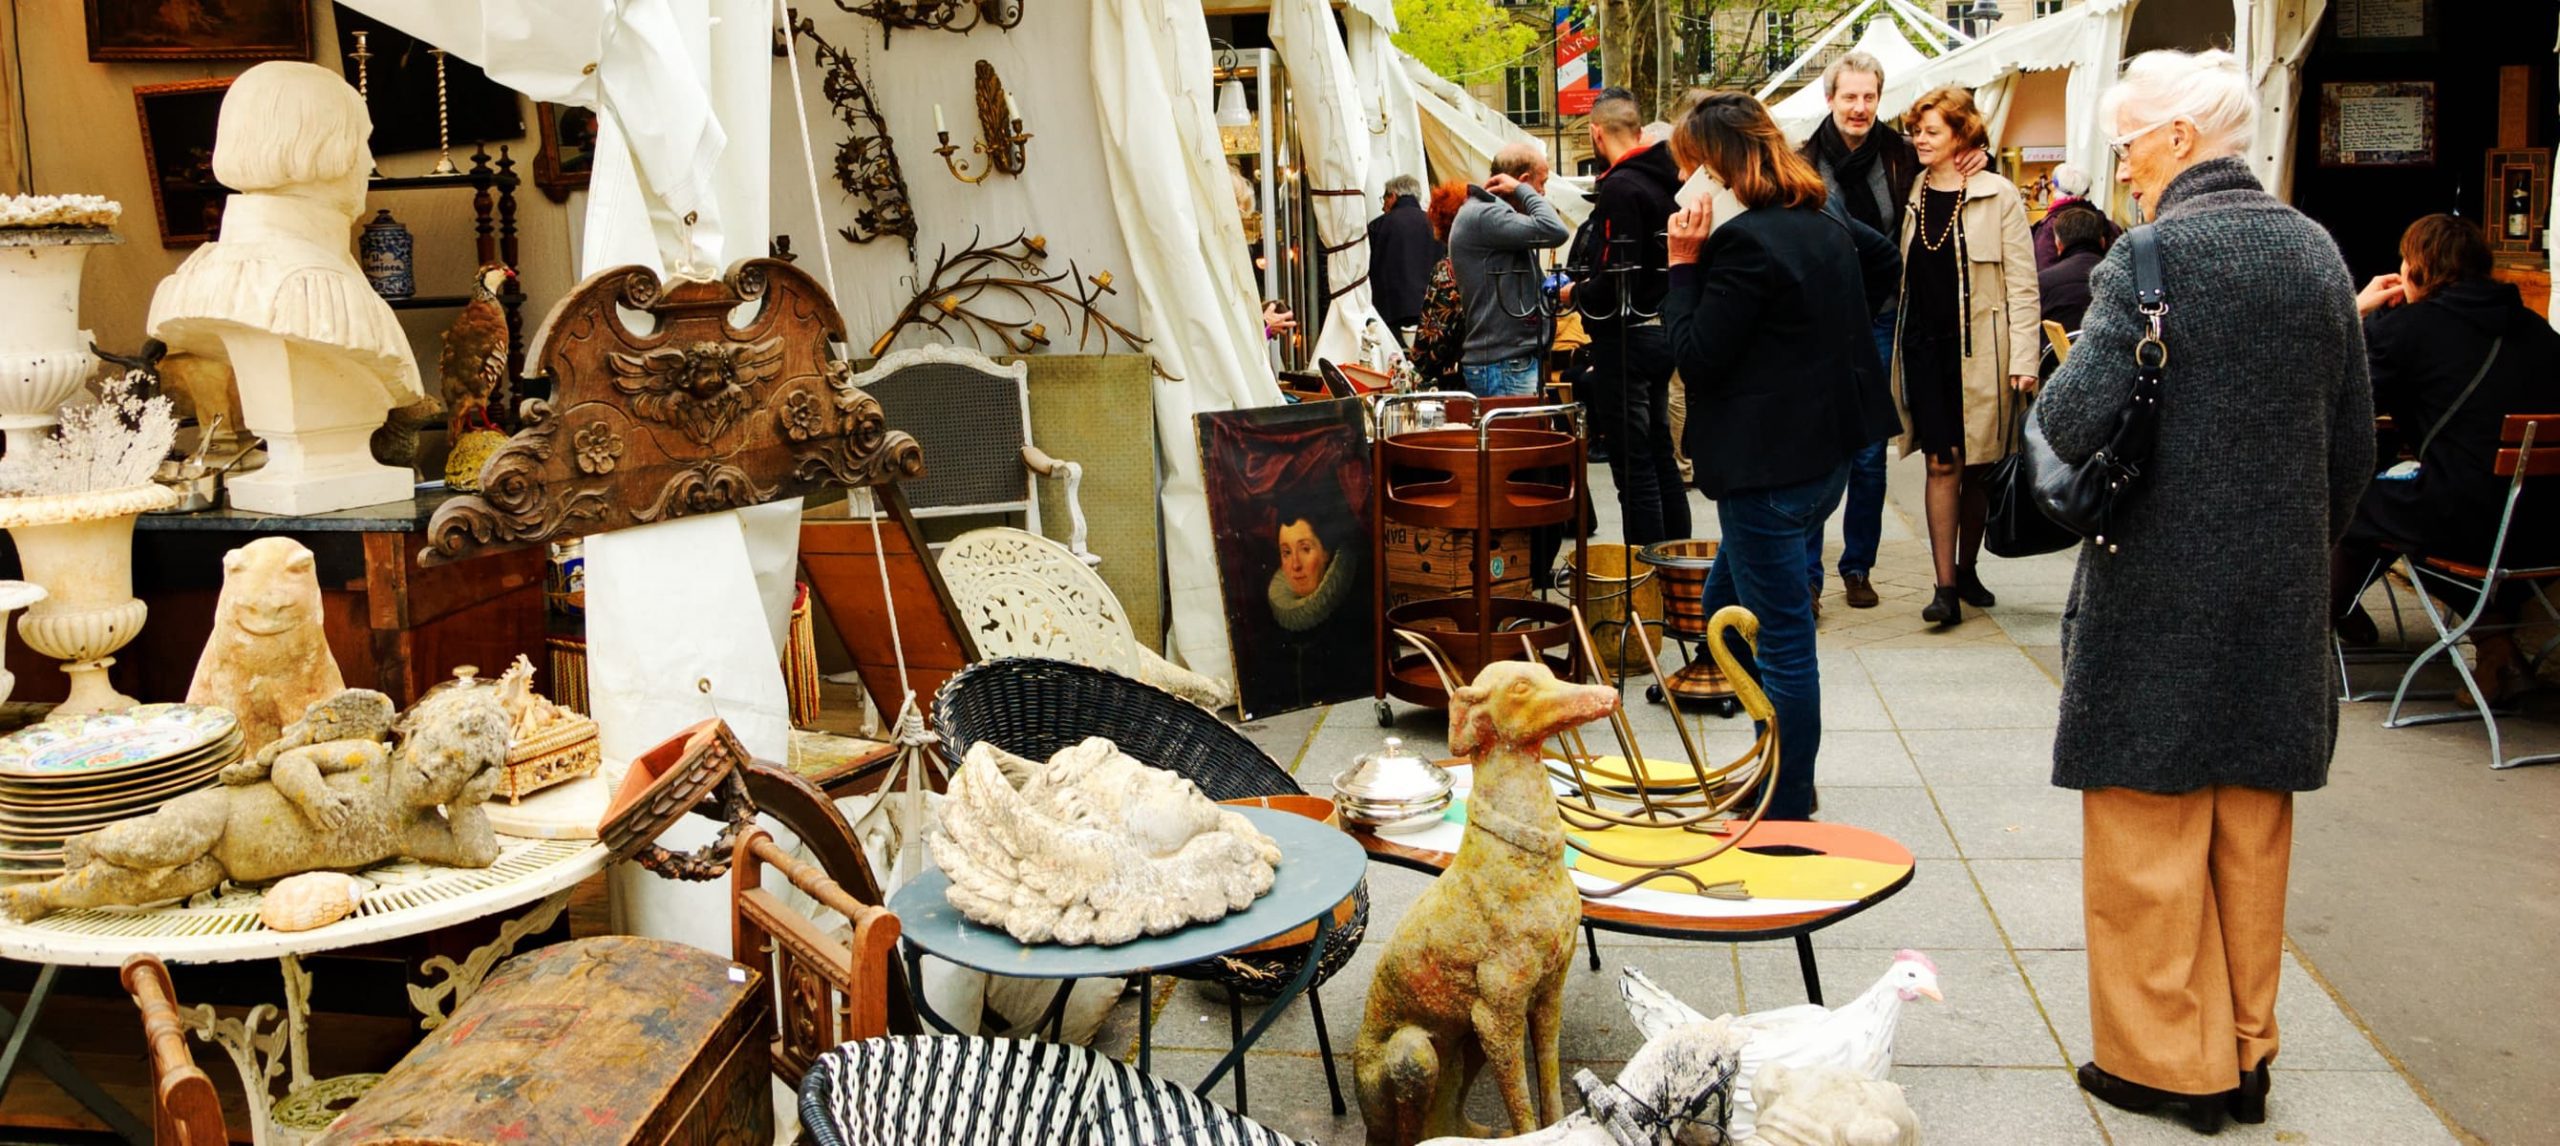 Market stall full of antique and people passing by